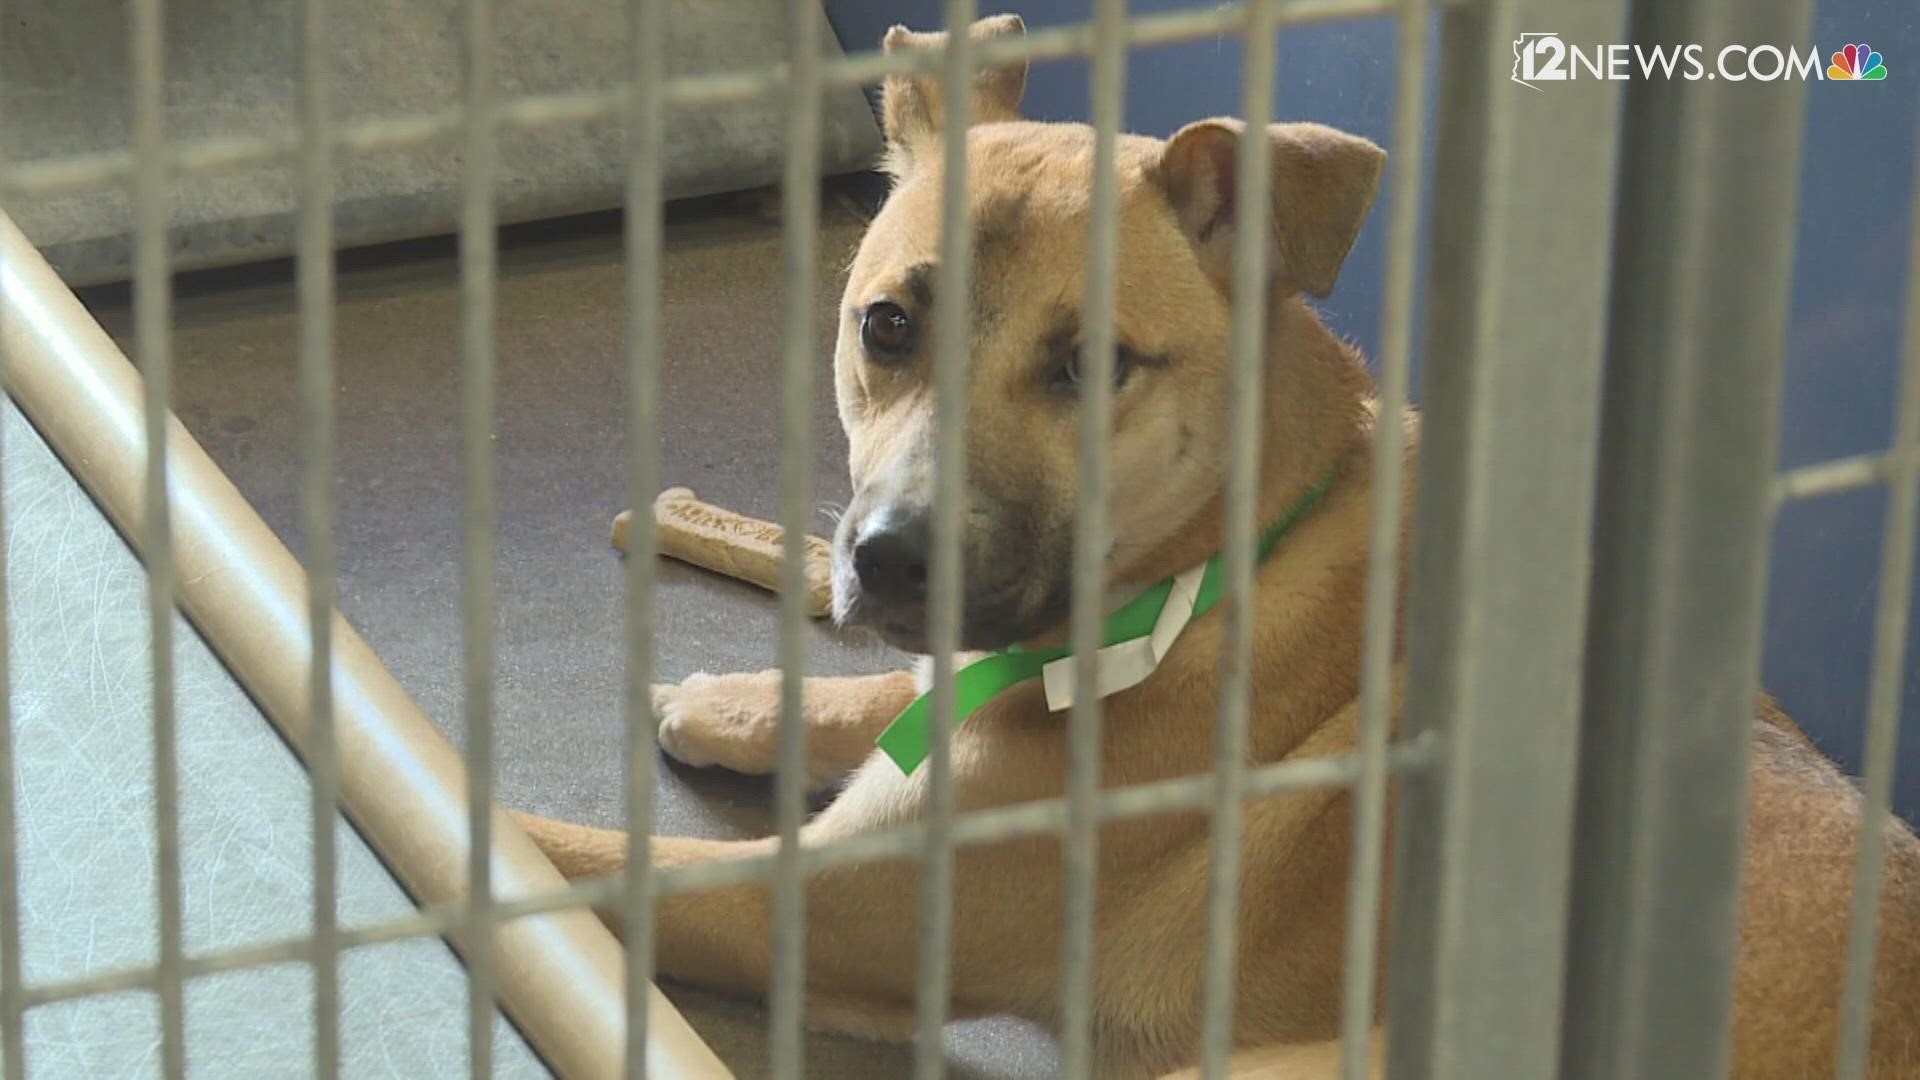 The Maricopa County Animal Care and Control shelter is at full capacity. Officials are expressing the need for pet adoptions and fostering to ease the strain.